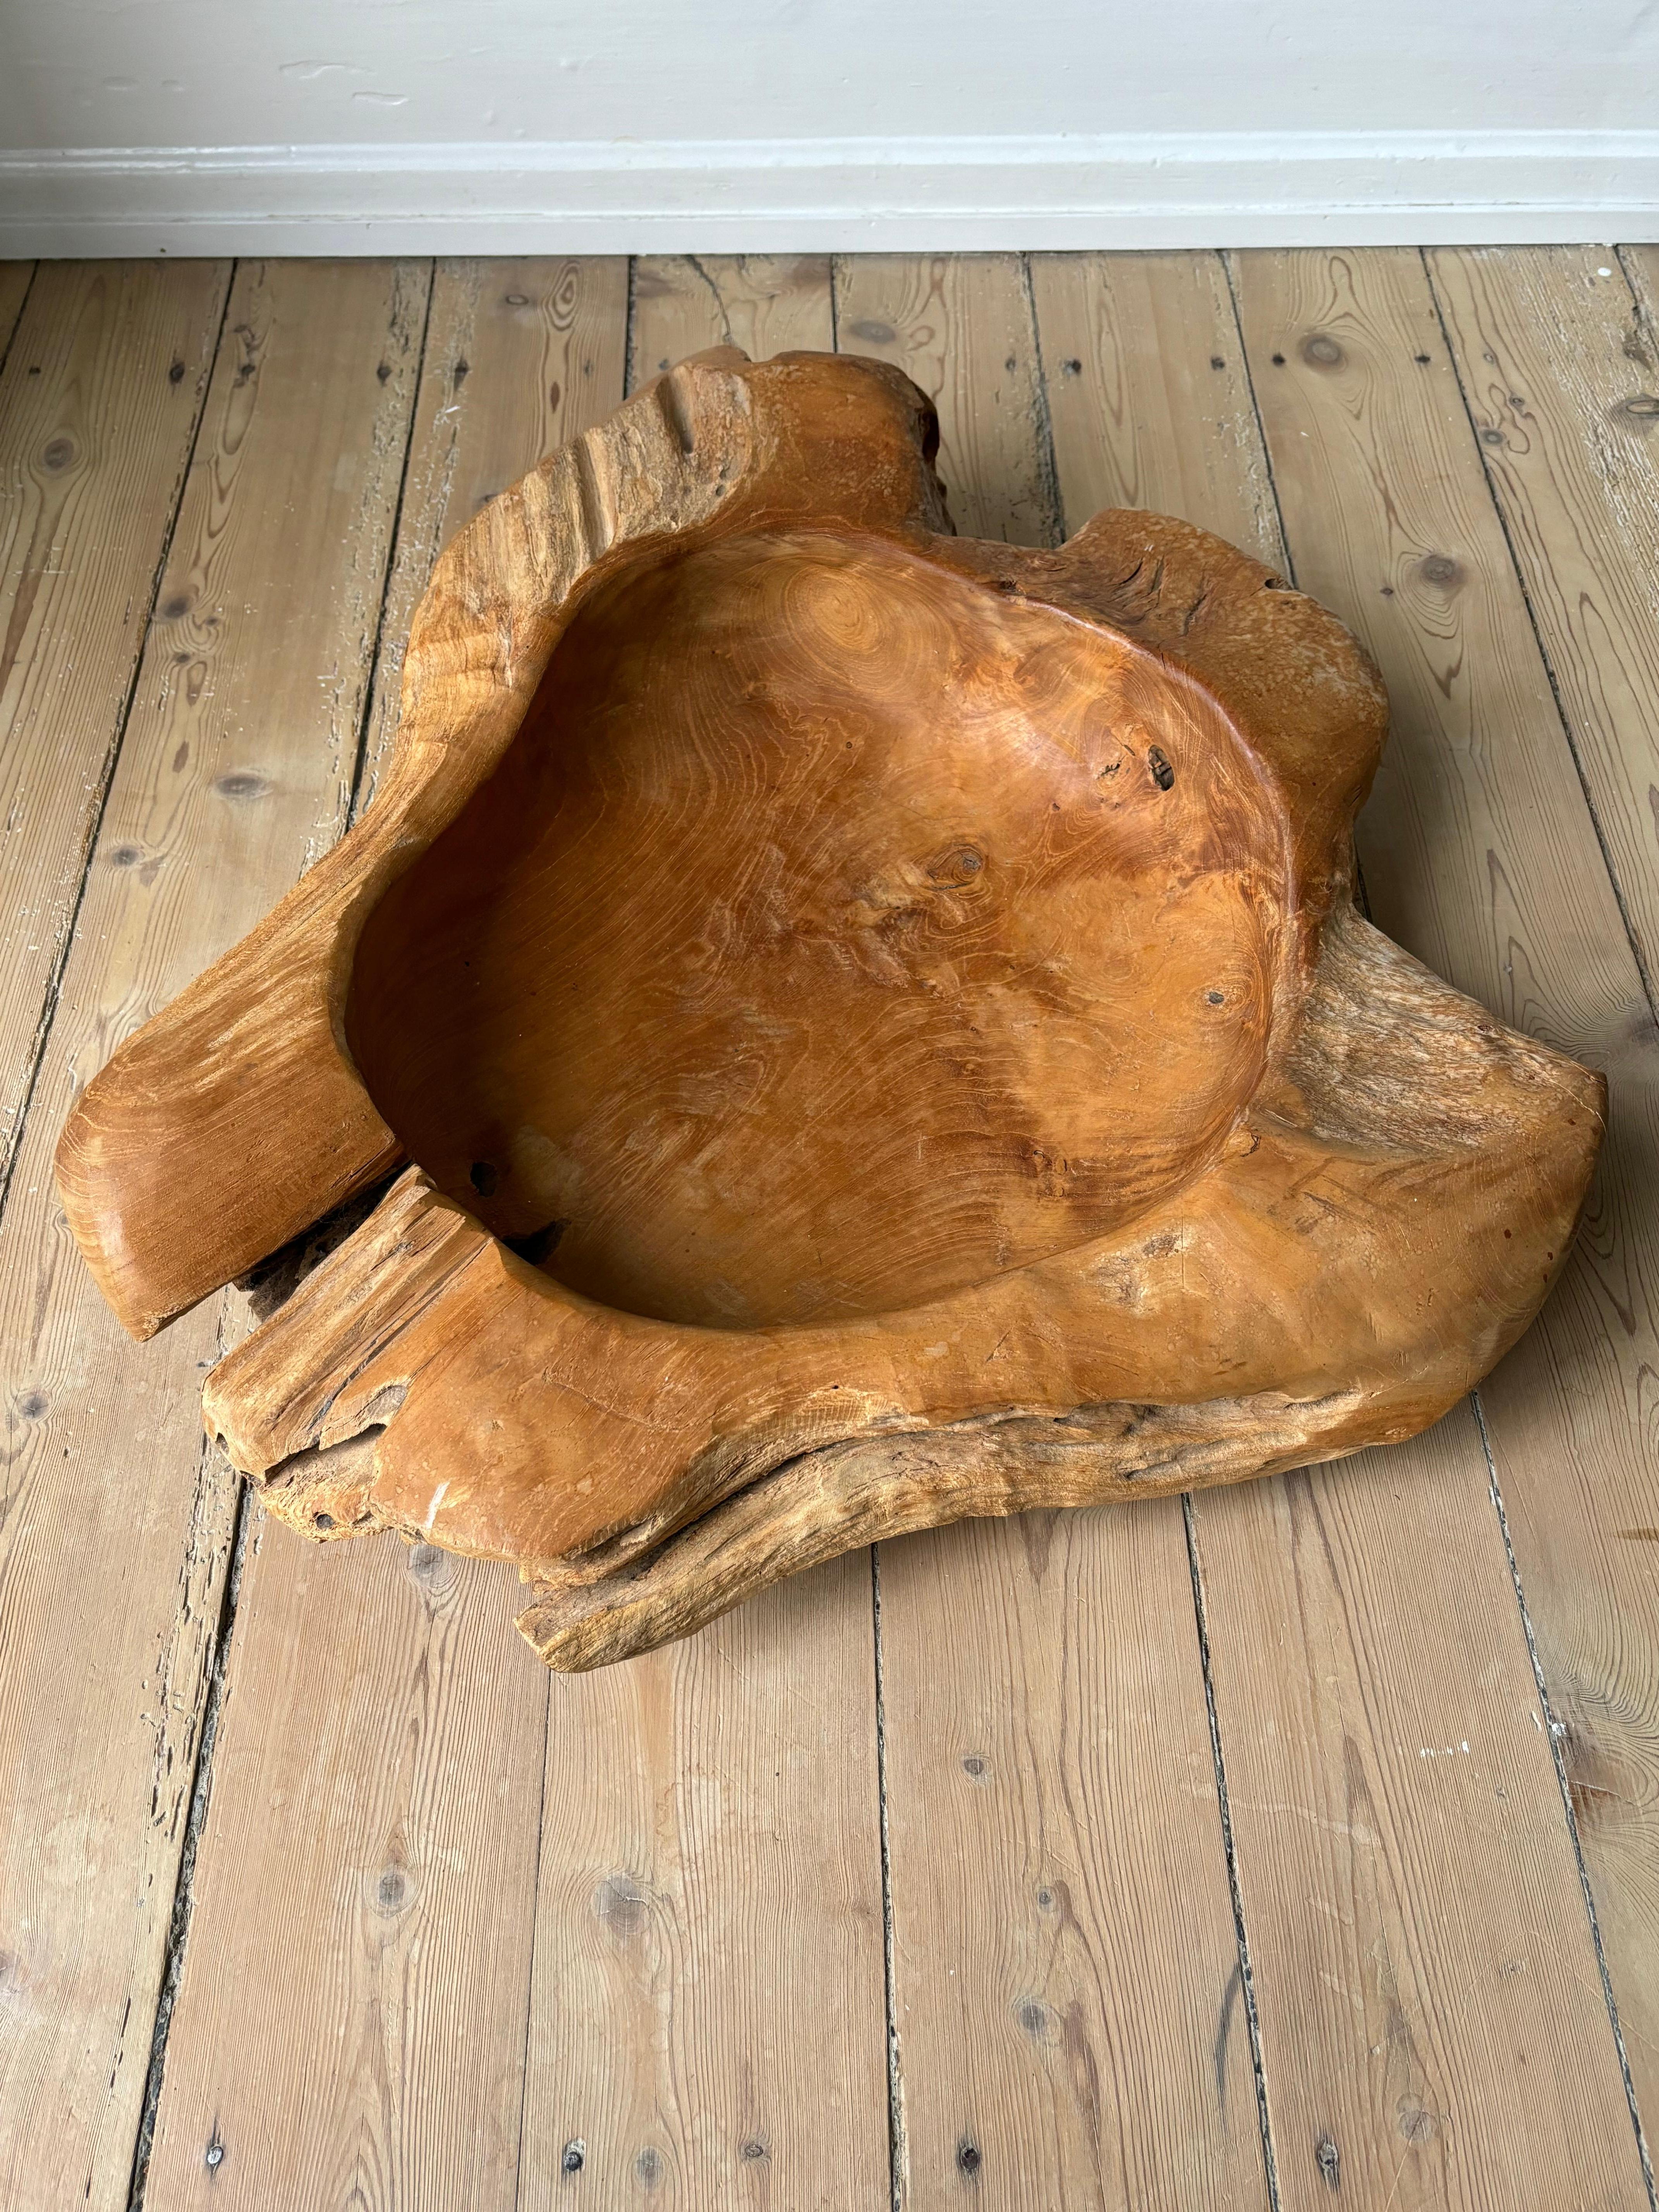 X-Large Vintage French Olive Wood Bowl, Early 20th Century For Sale 3